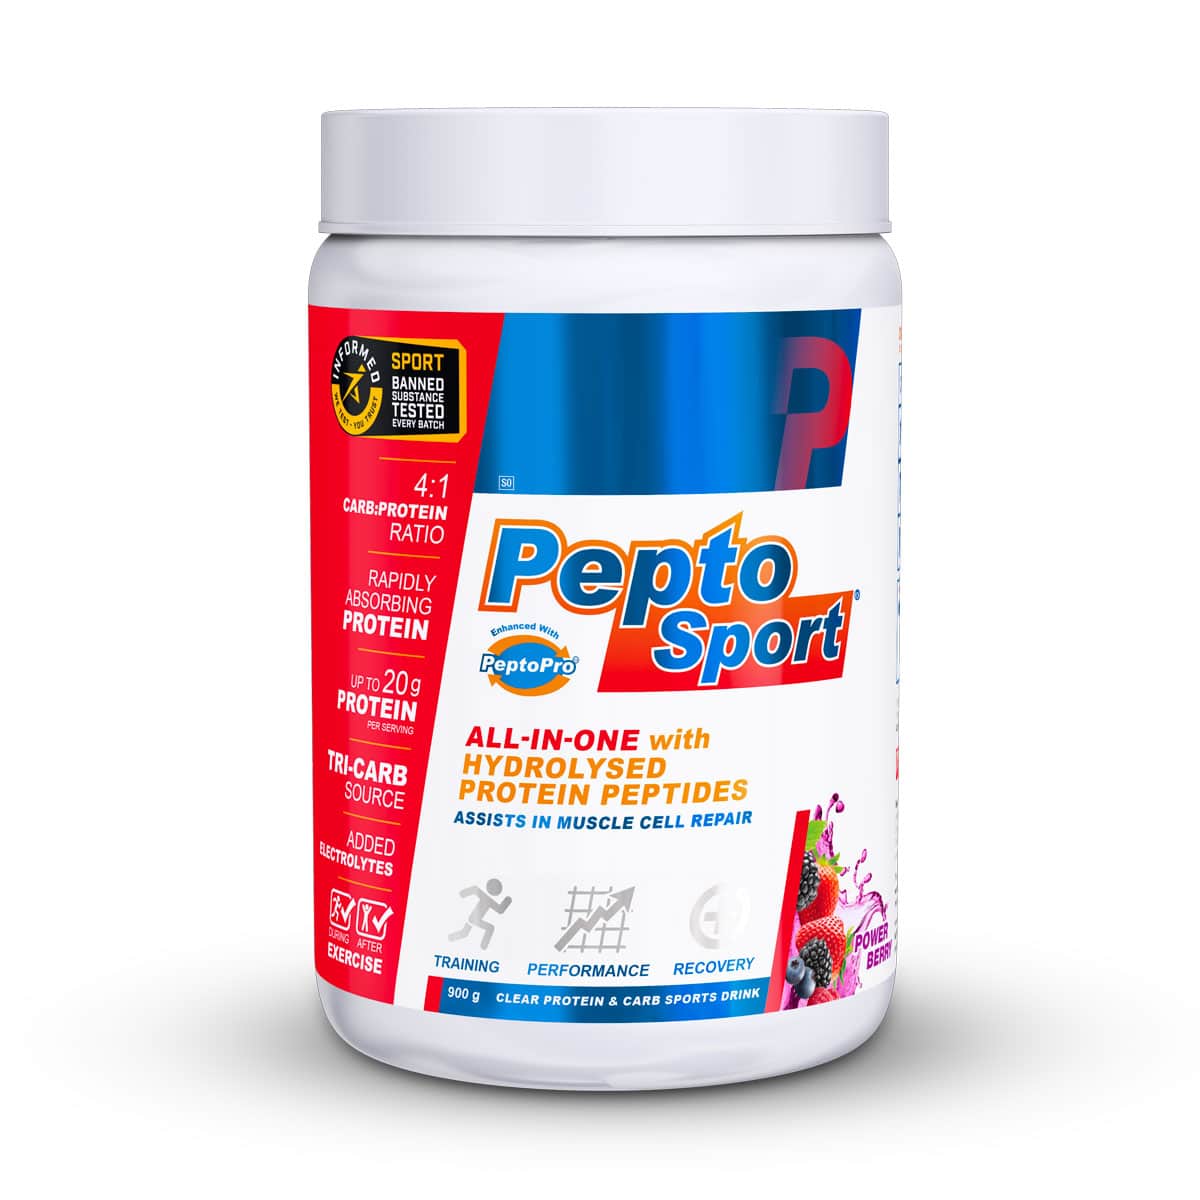 @Life PeptoSport Protein Drink Mix Mixed Berry - 900g